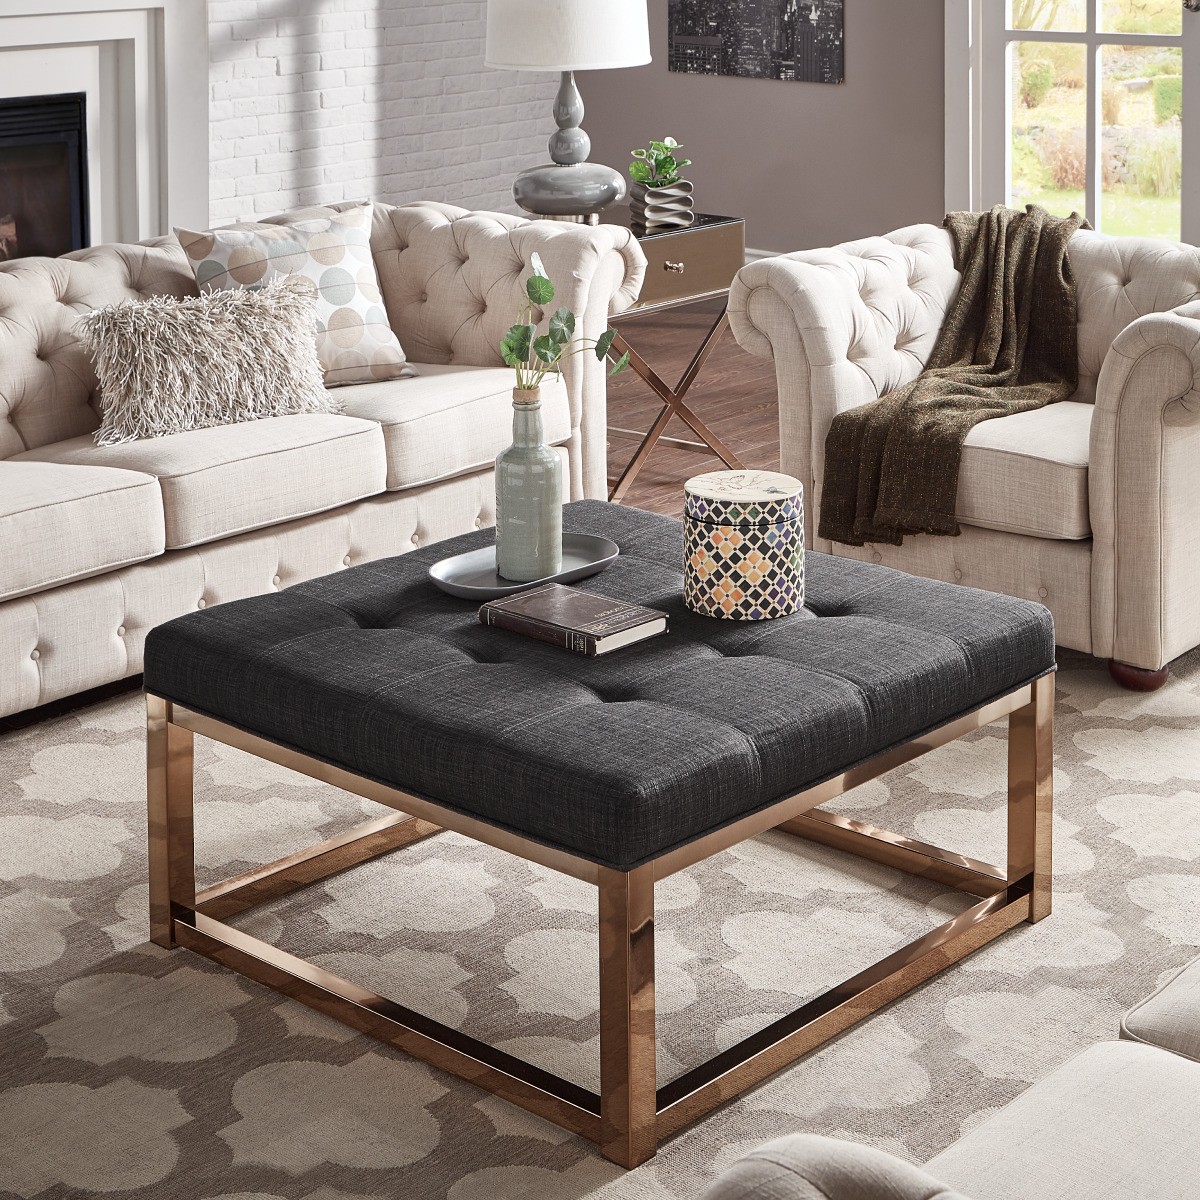 Weston home libby dimpled tufted cushion ottoman coffee 2